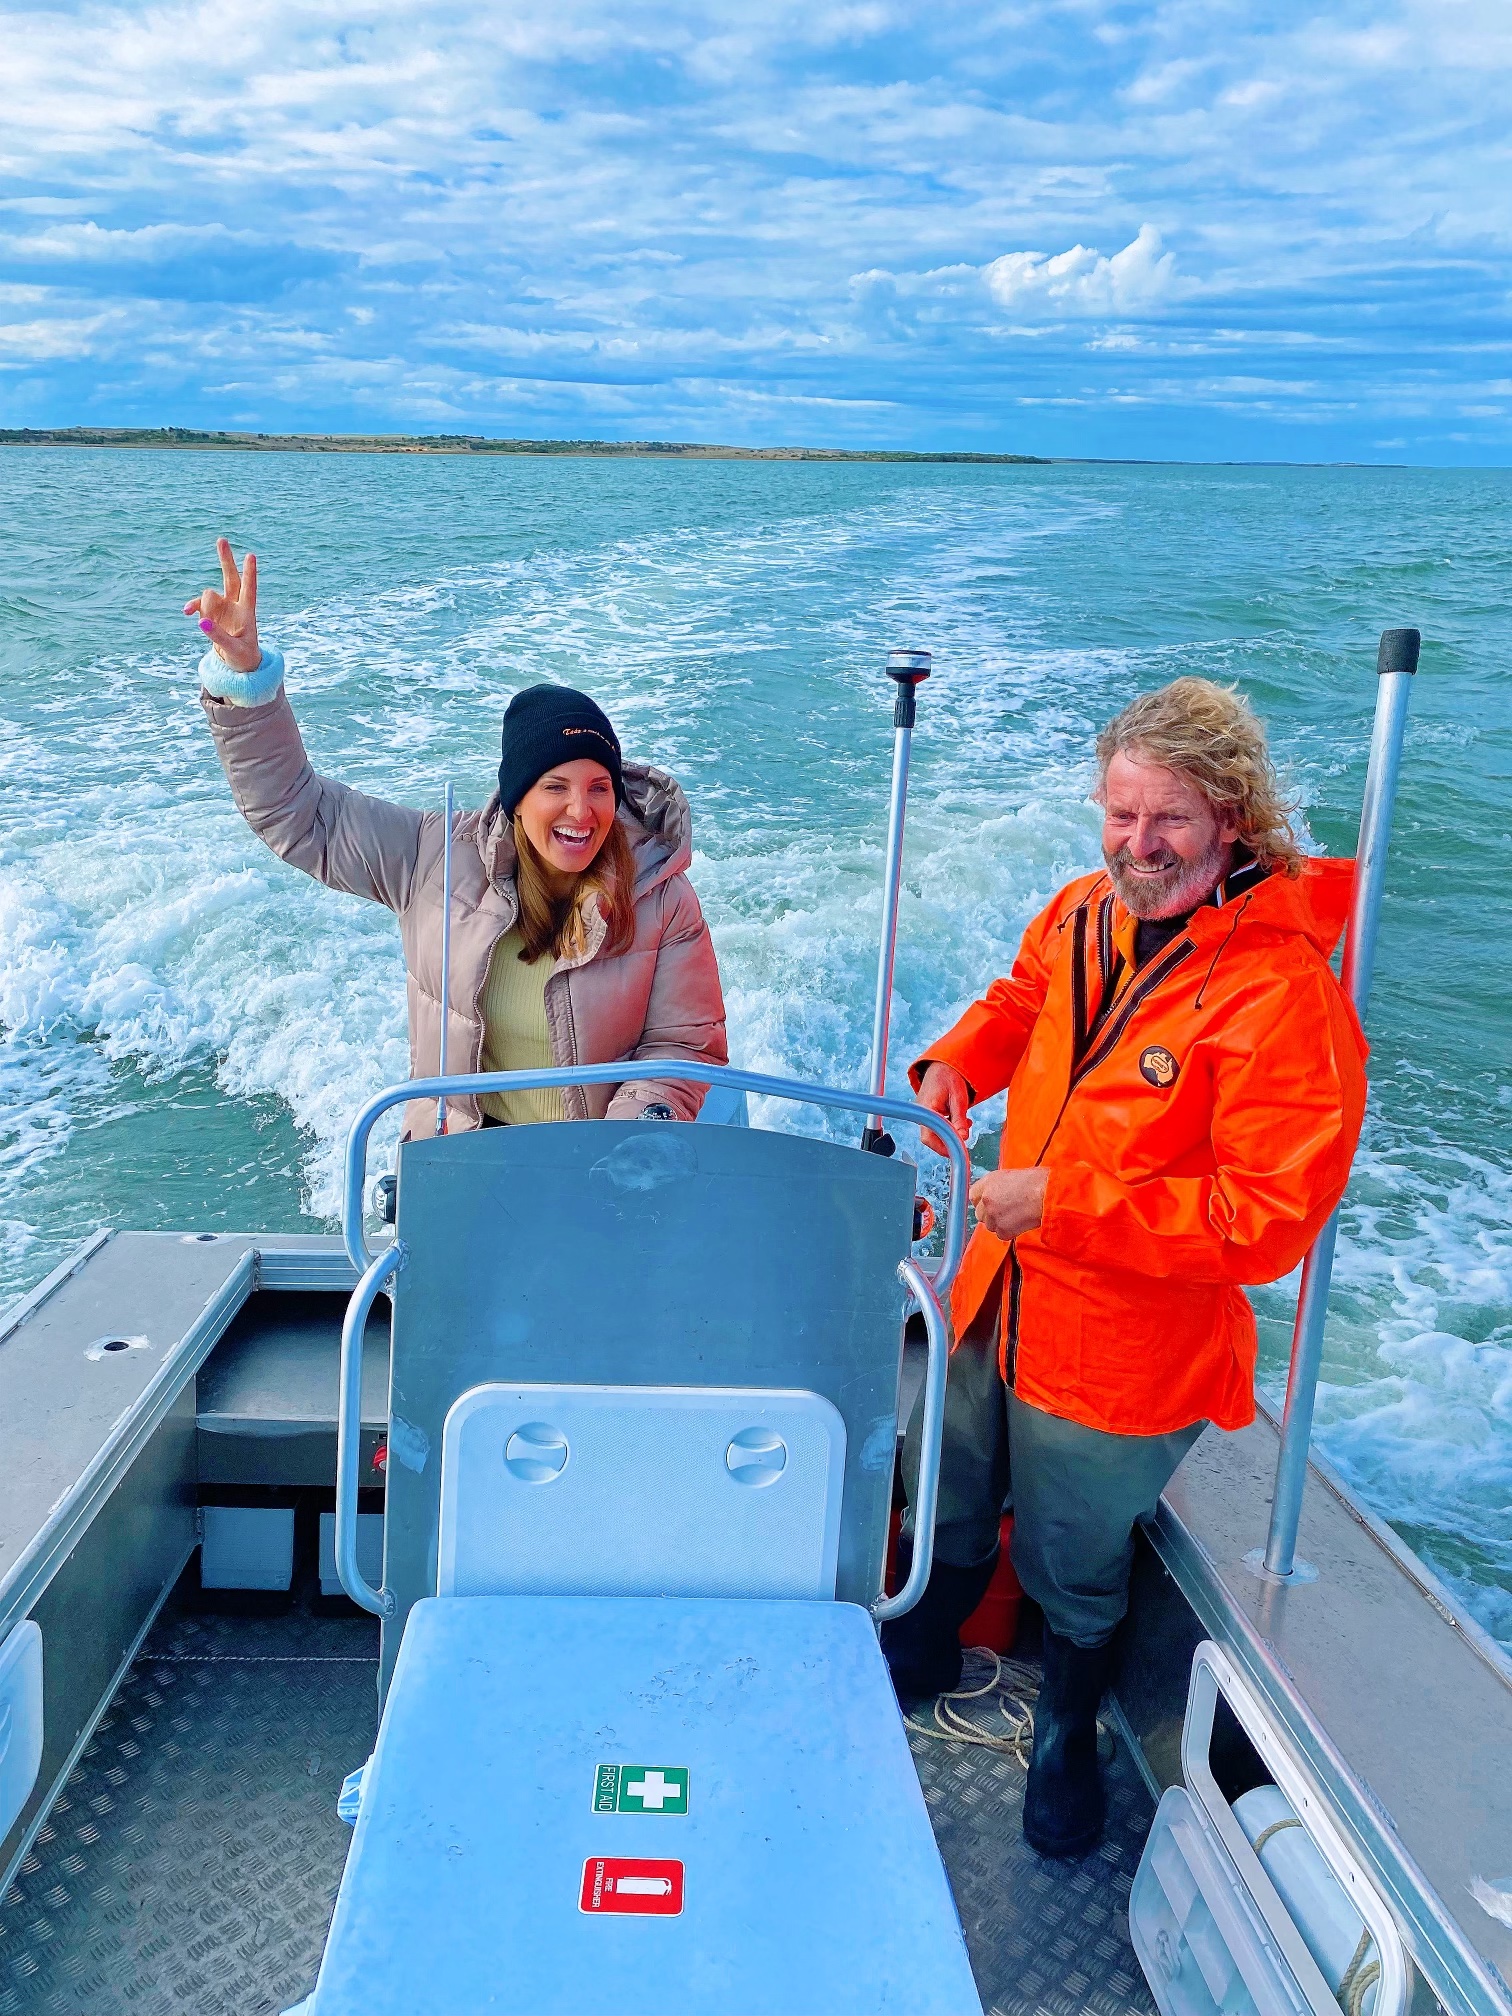 WIN a Seafood & Seals Tour for two people thanks to Coorong Wildside Tours!